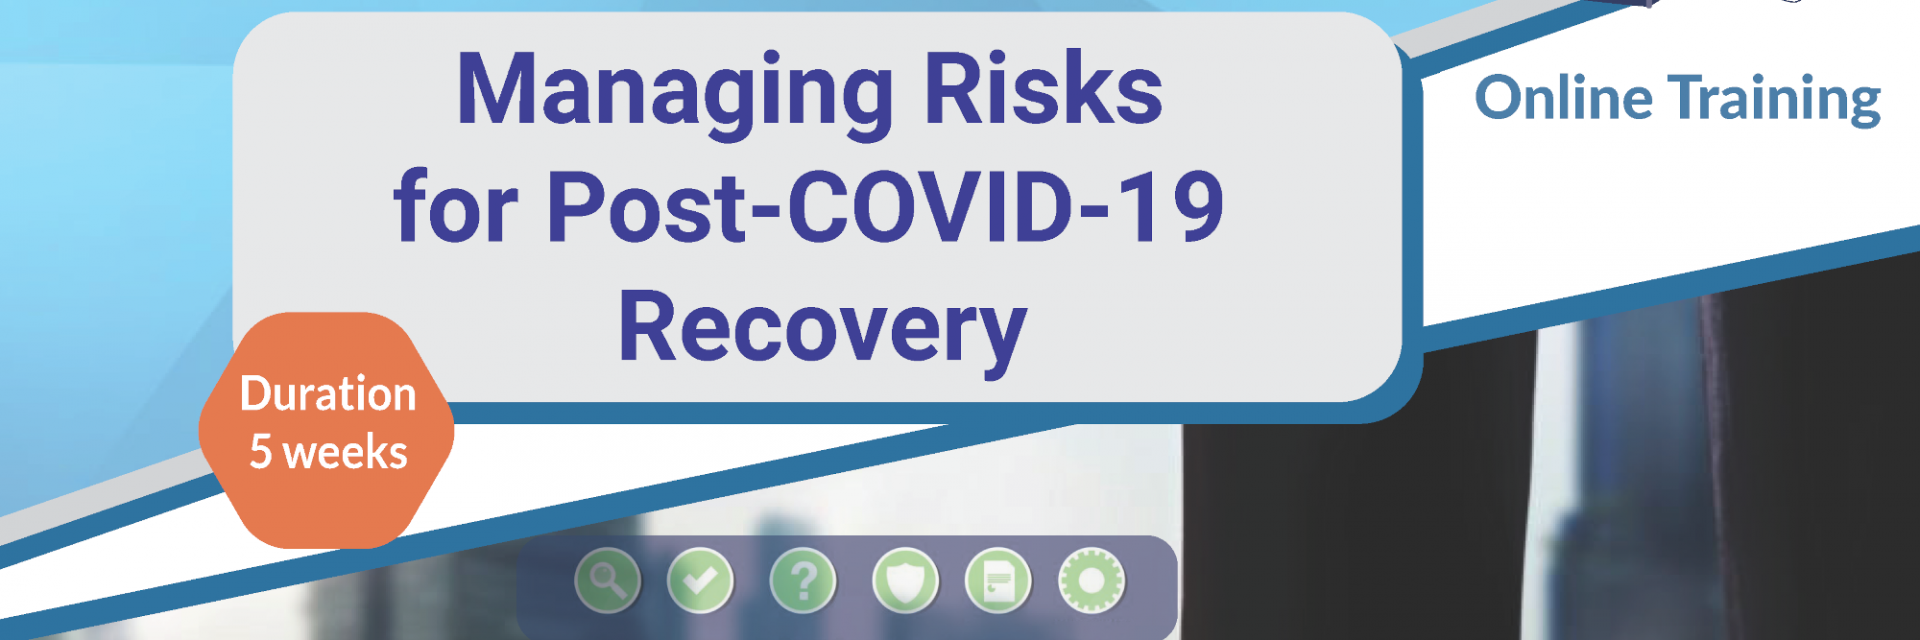 Managing Risks for Post-COVID-19 Recovery